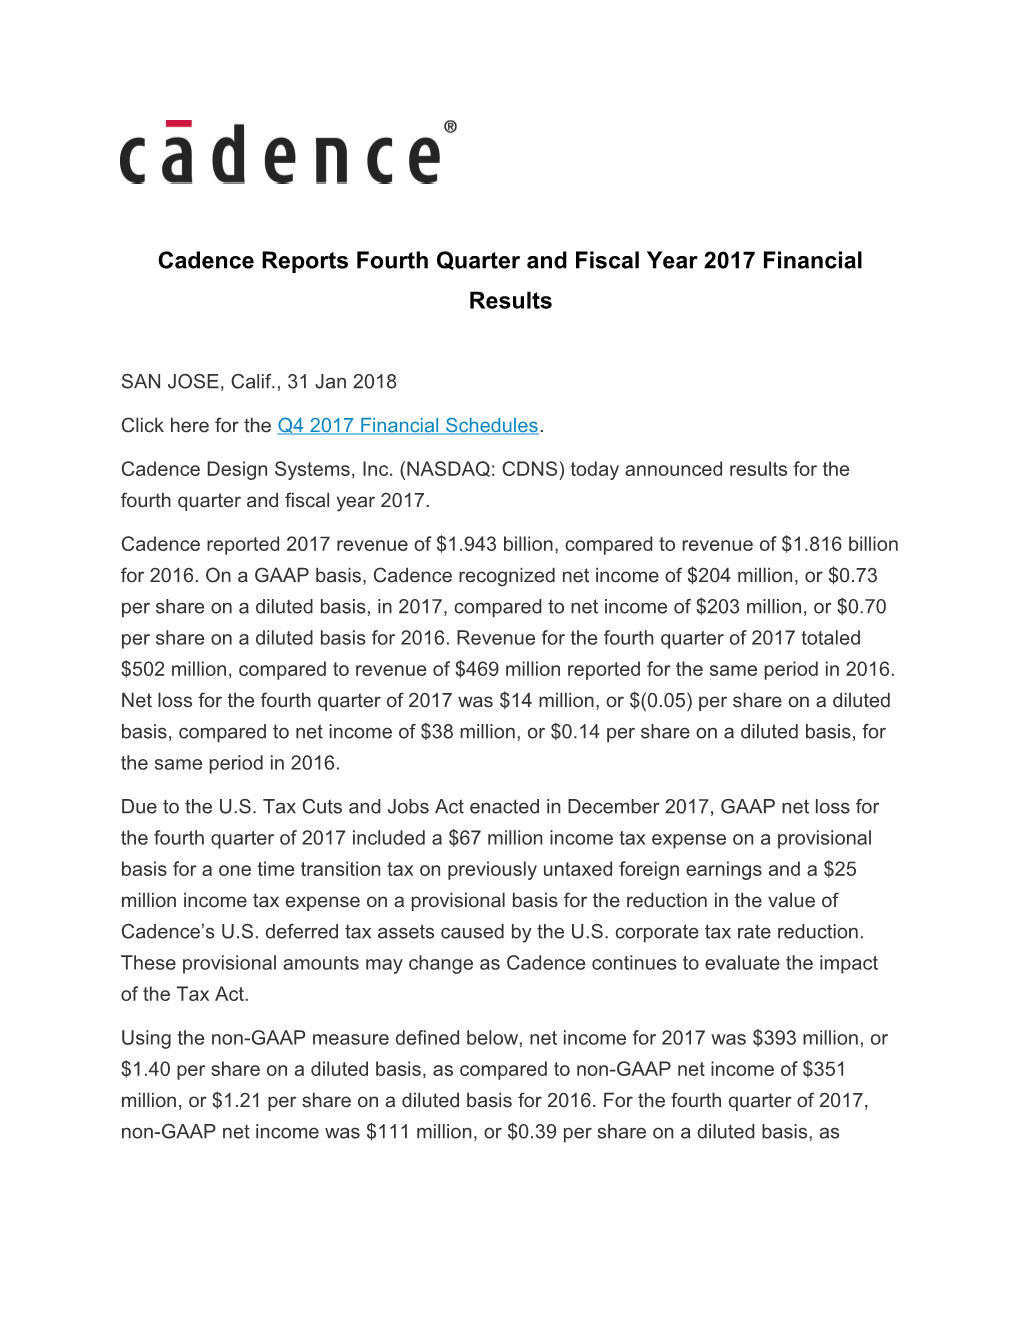 Cadence Reports Fourth Quarter and Fiscal Year 2017 Financial Results